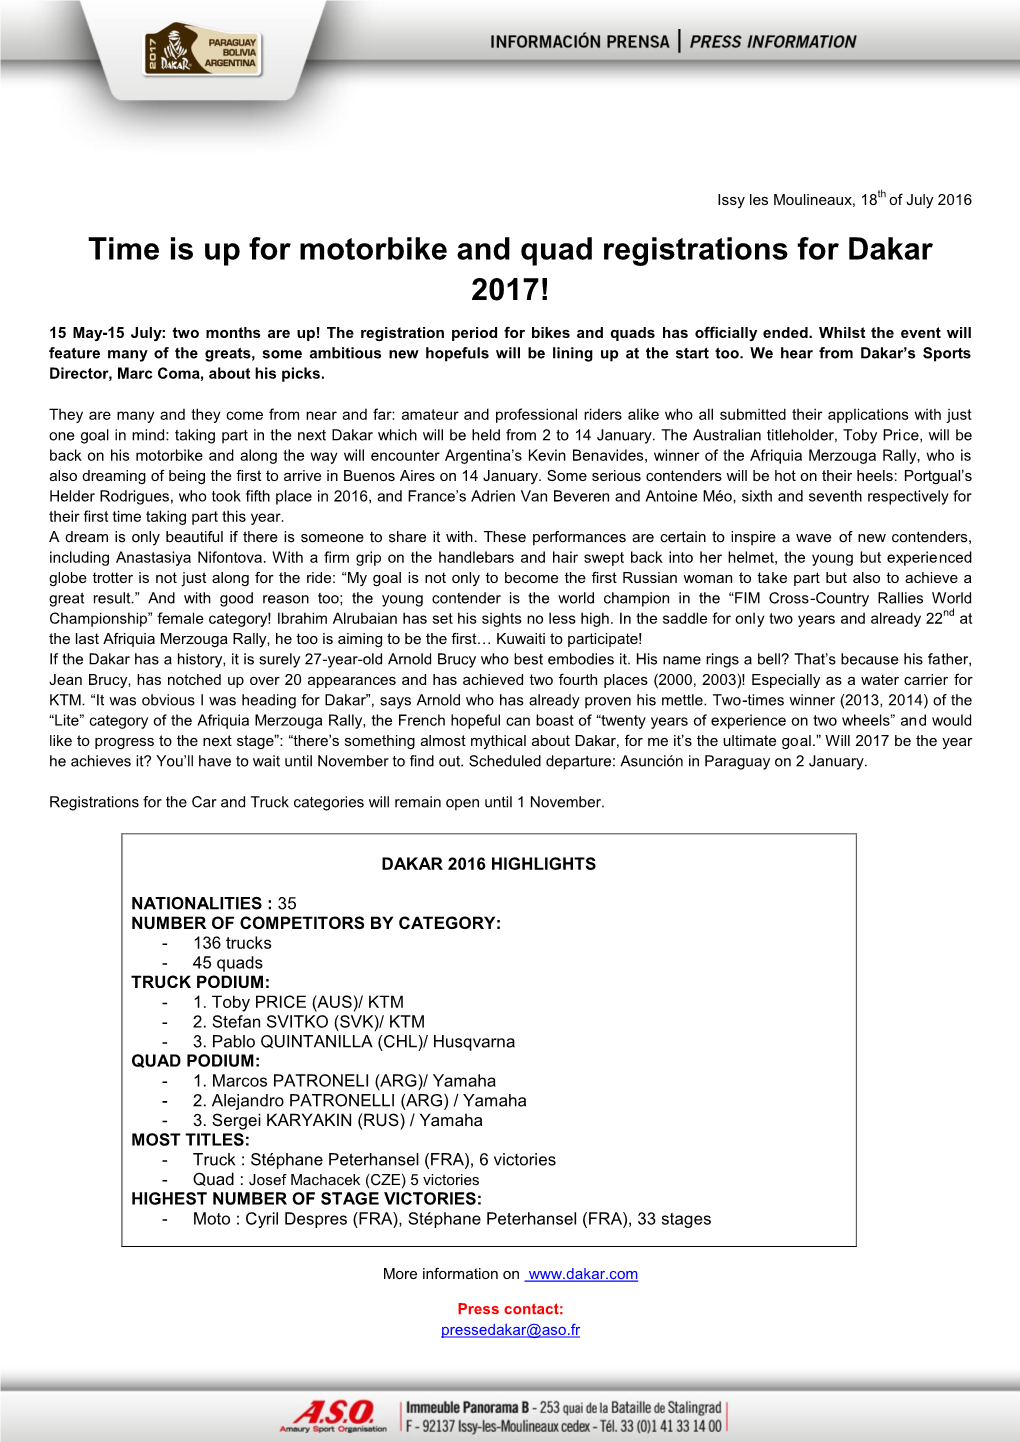 Time Is up for Motorbike and Quad Registrations for Dakar 2017!